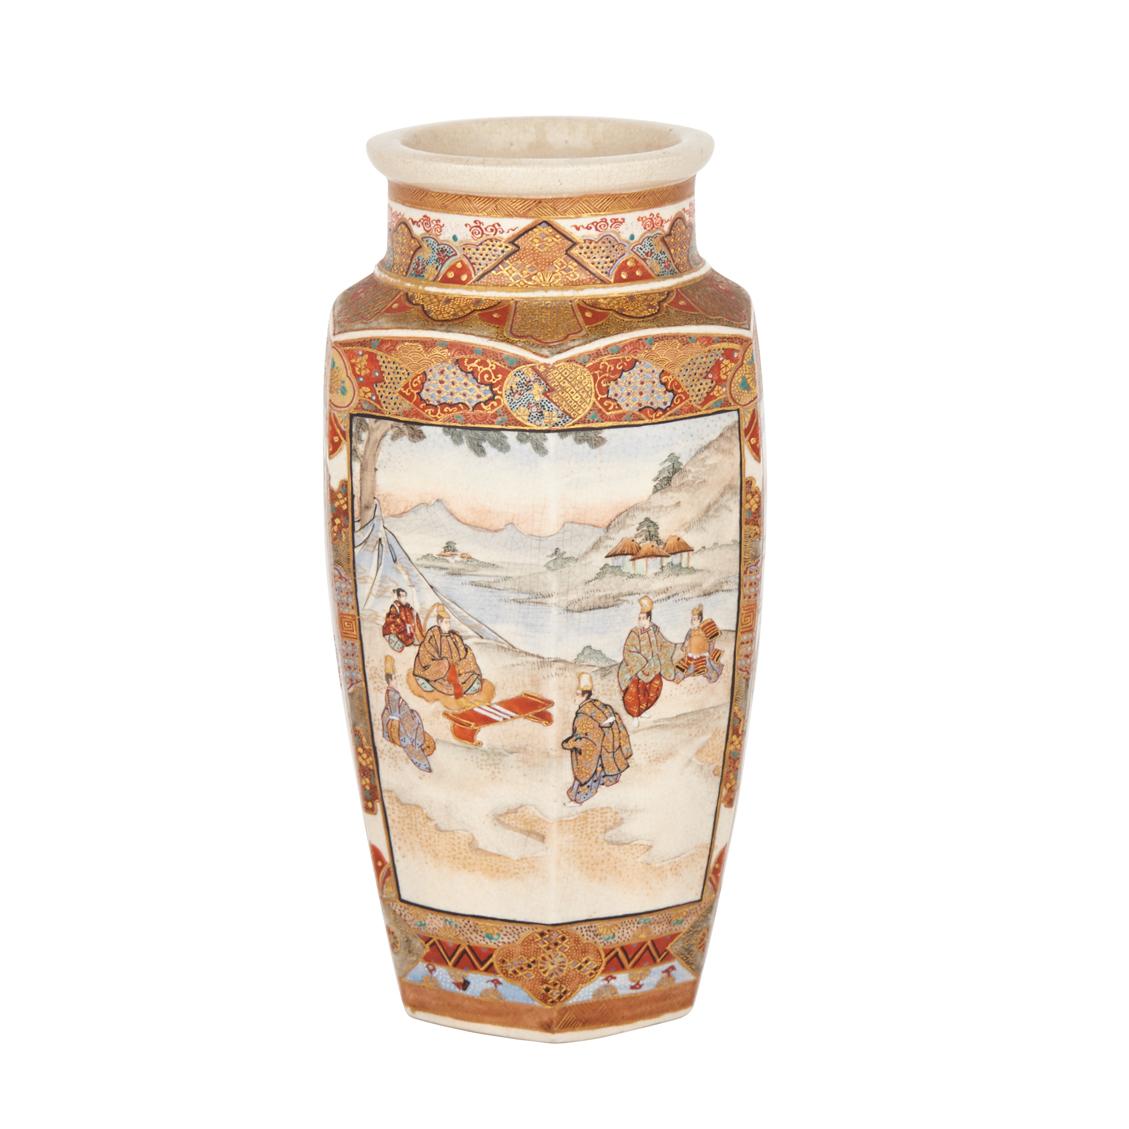 SATSUMA HEXAGONAL VASE, LATE 19TH CENTURY 19世紀晚期 薩摩燒六方瓶  With three reserves depicting figures in - Image 3 of 3